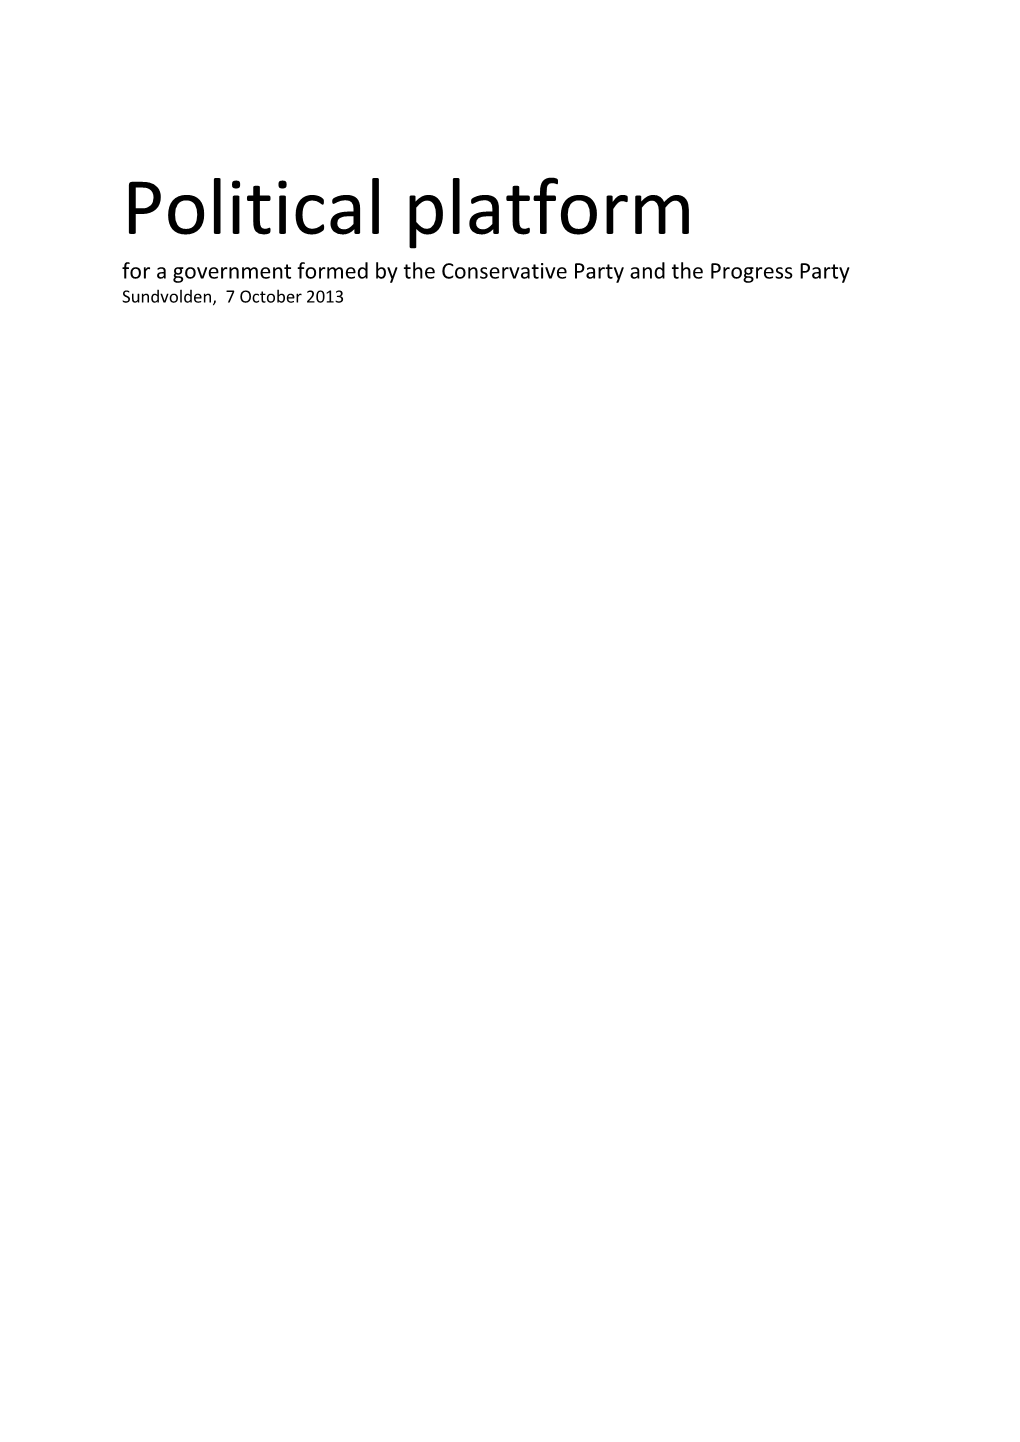 Political Platform for a Government Formed by the Conservative Party and the Progress Party Sundvolden, 7 October 2013